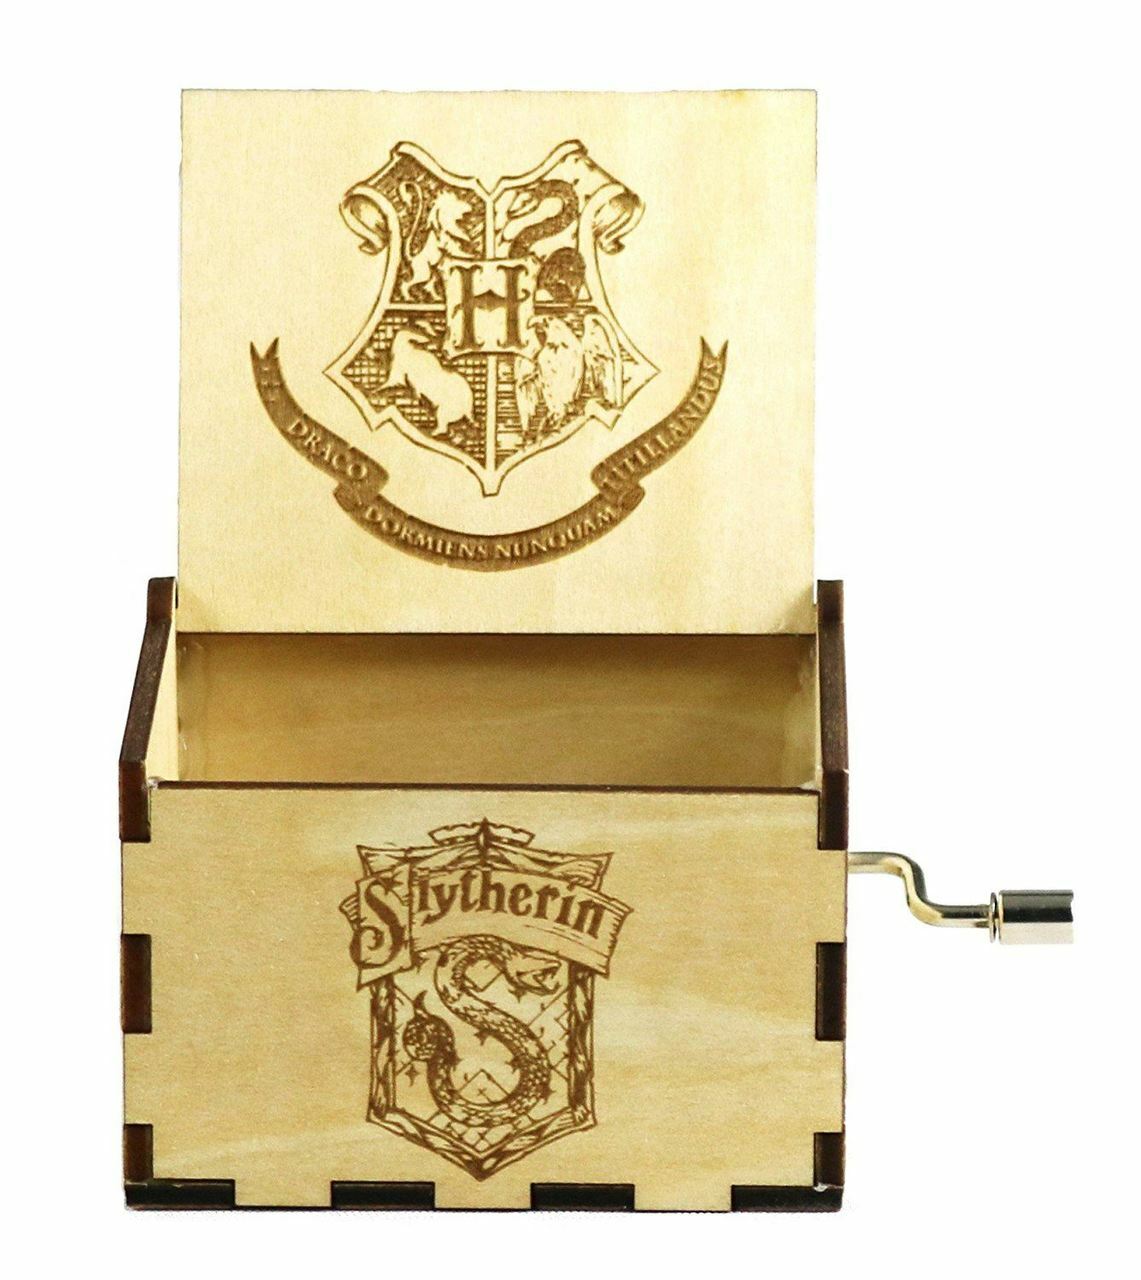 Harry Potter Theamed Music Box Plays The Harry Potter Theme Song Made from Wood With House Badges